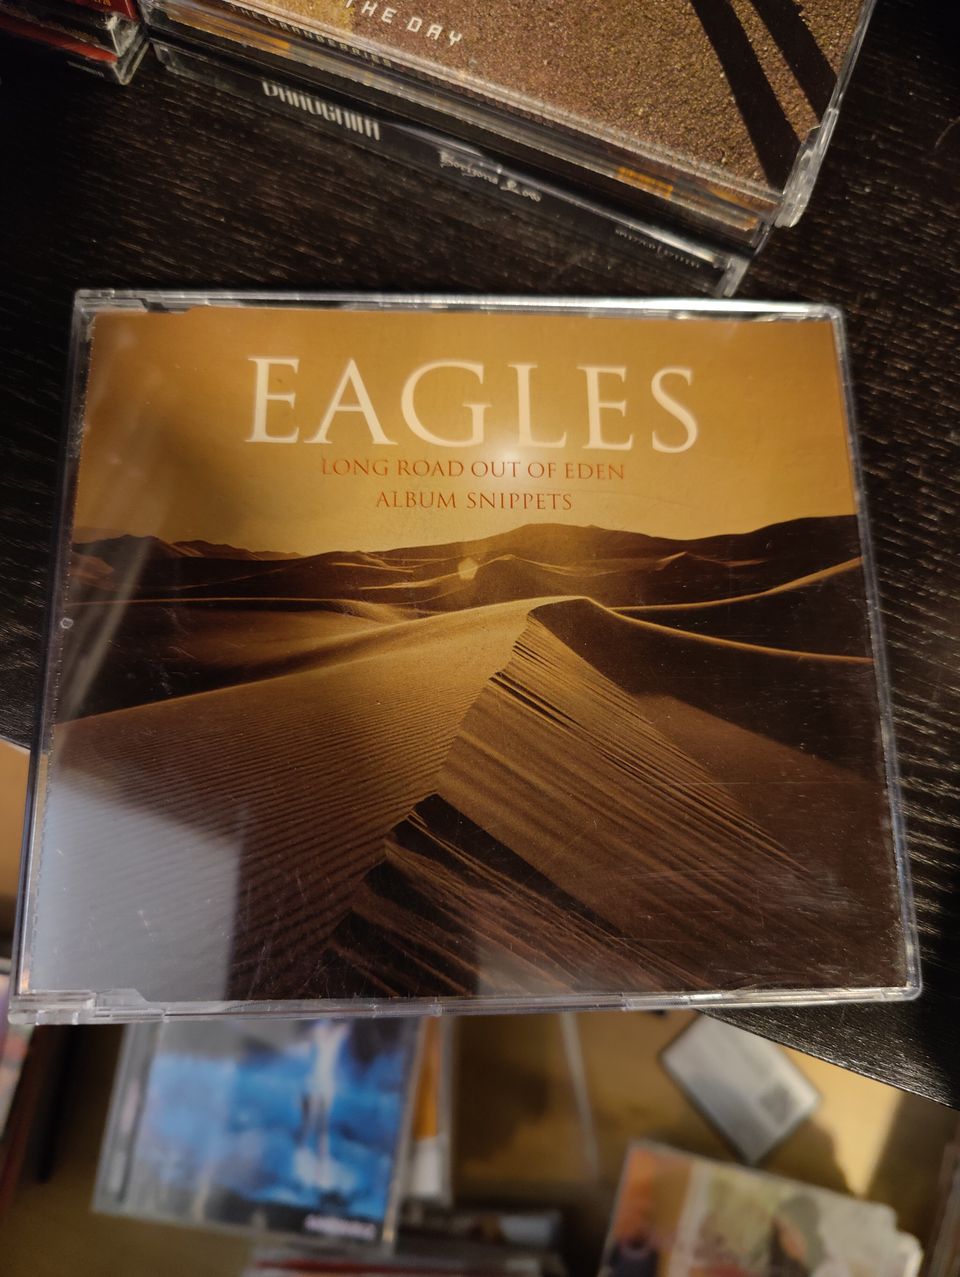 Eagles long Road out of Eden album snippets single / EP